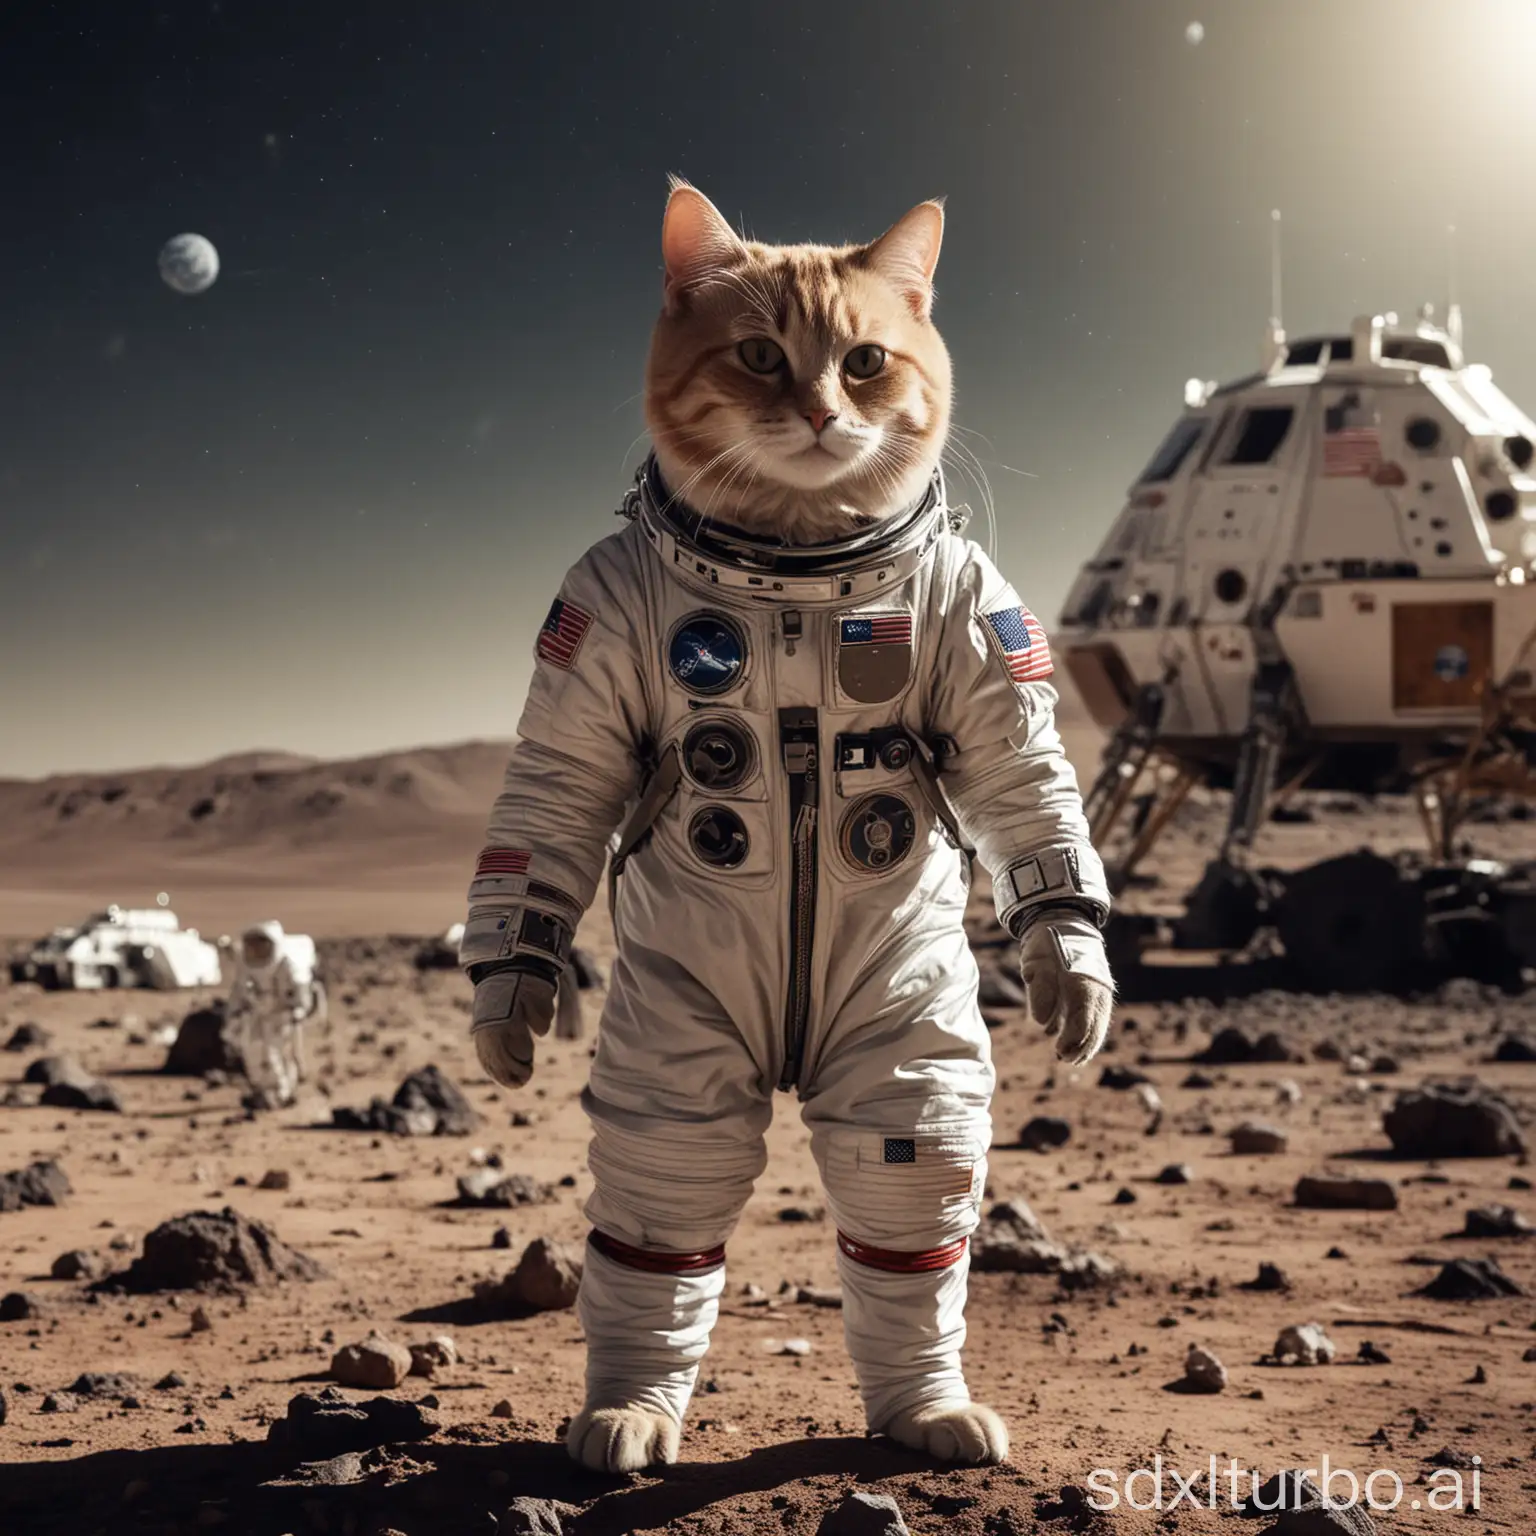 Space-Cat-in-Spacesuit-on-Moon-with-Spacecraft